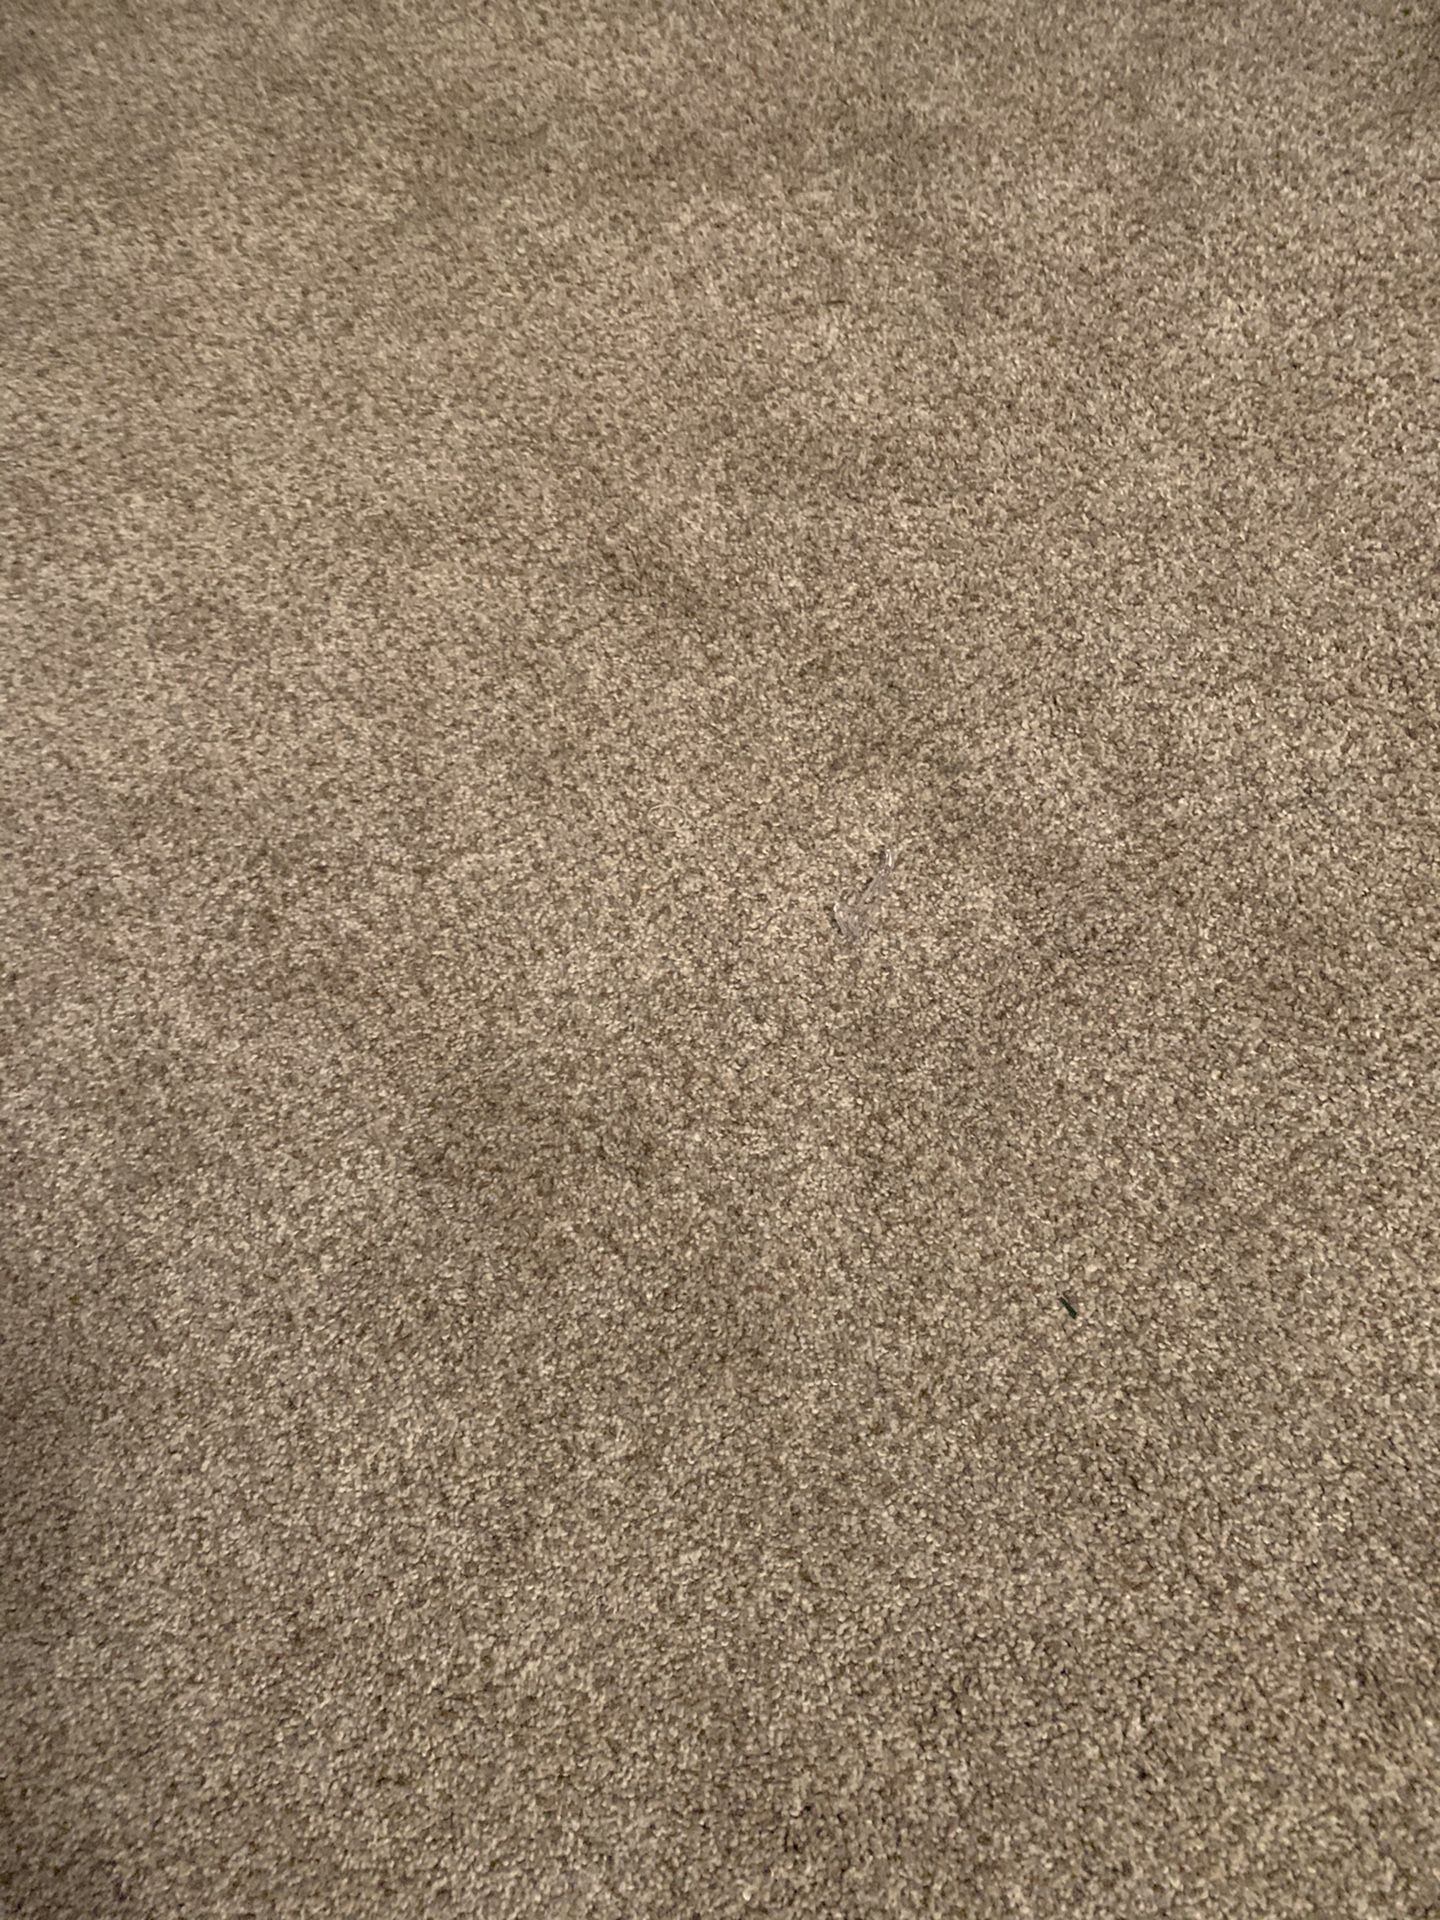 Beige carpet and underlay. Enough for 10’ x 10’ room